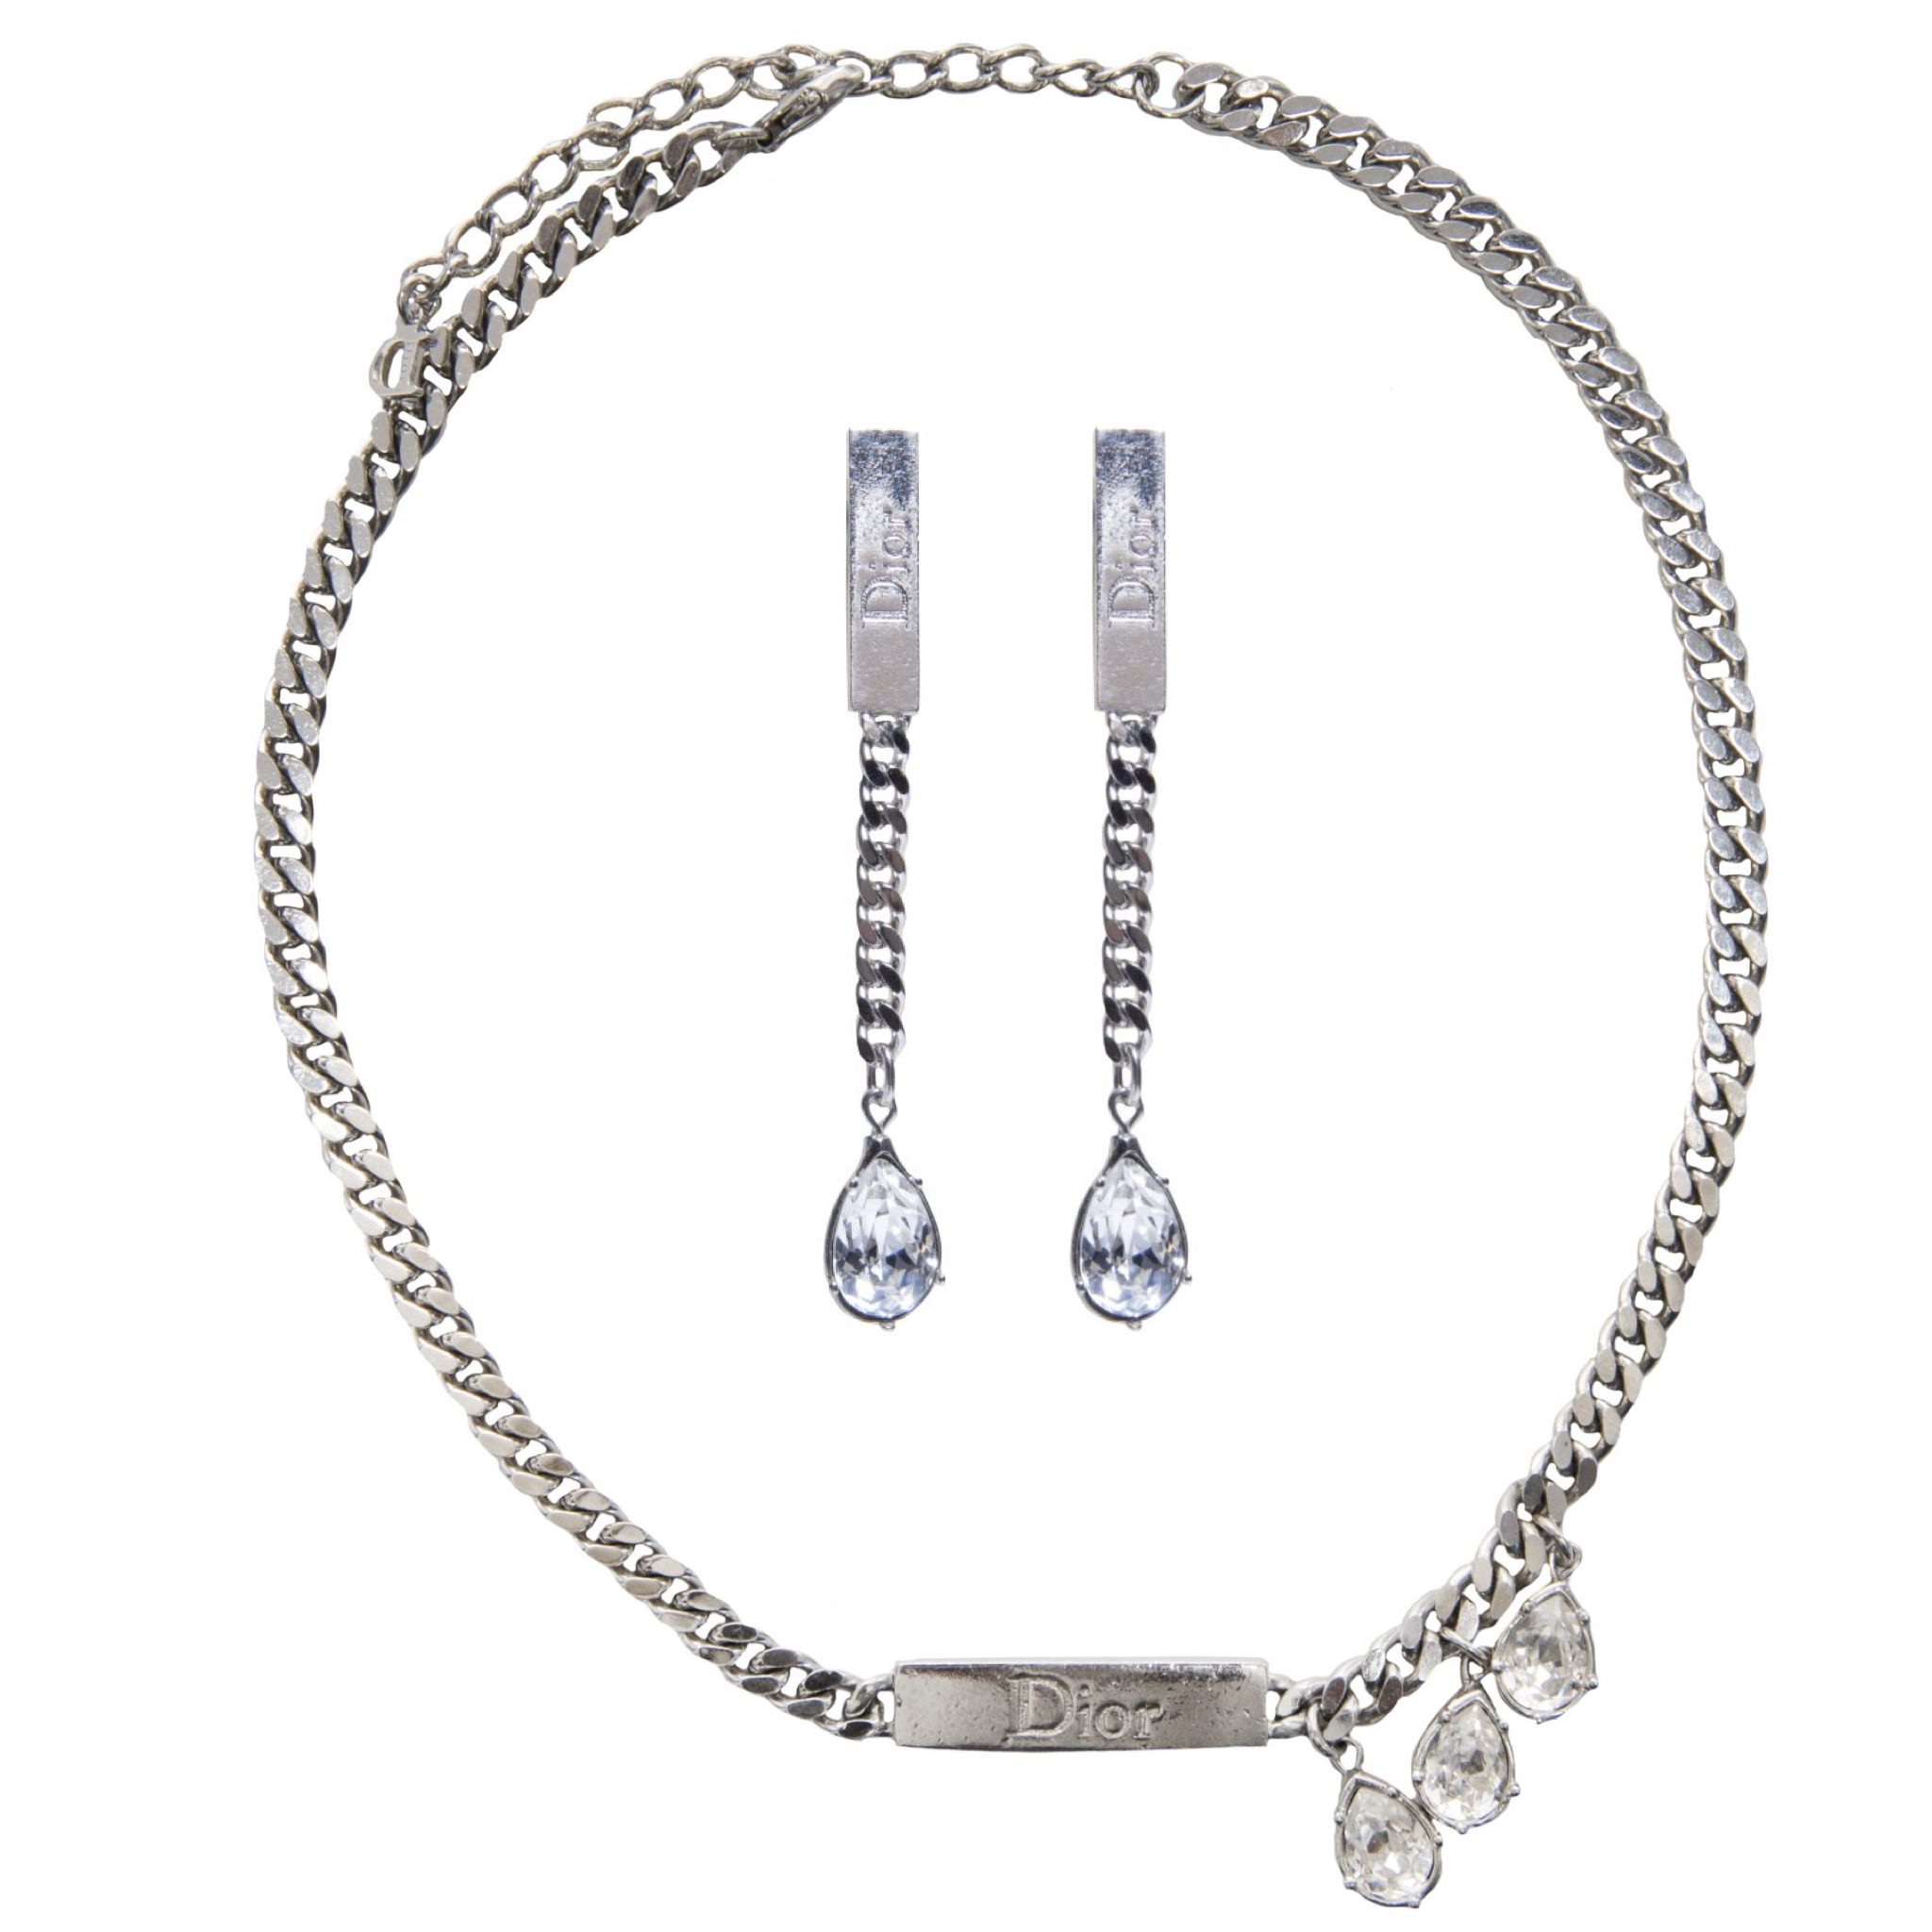 Vintage silver chain set with crystal drops